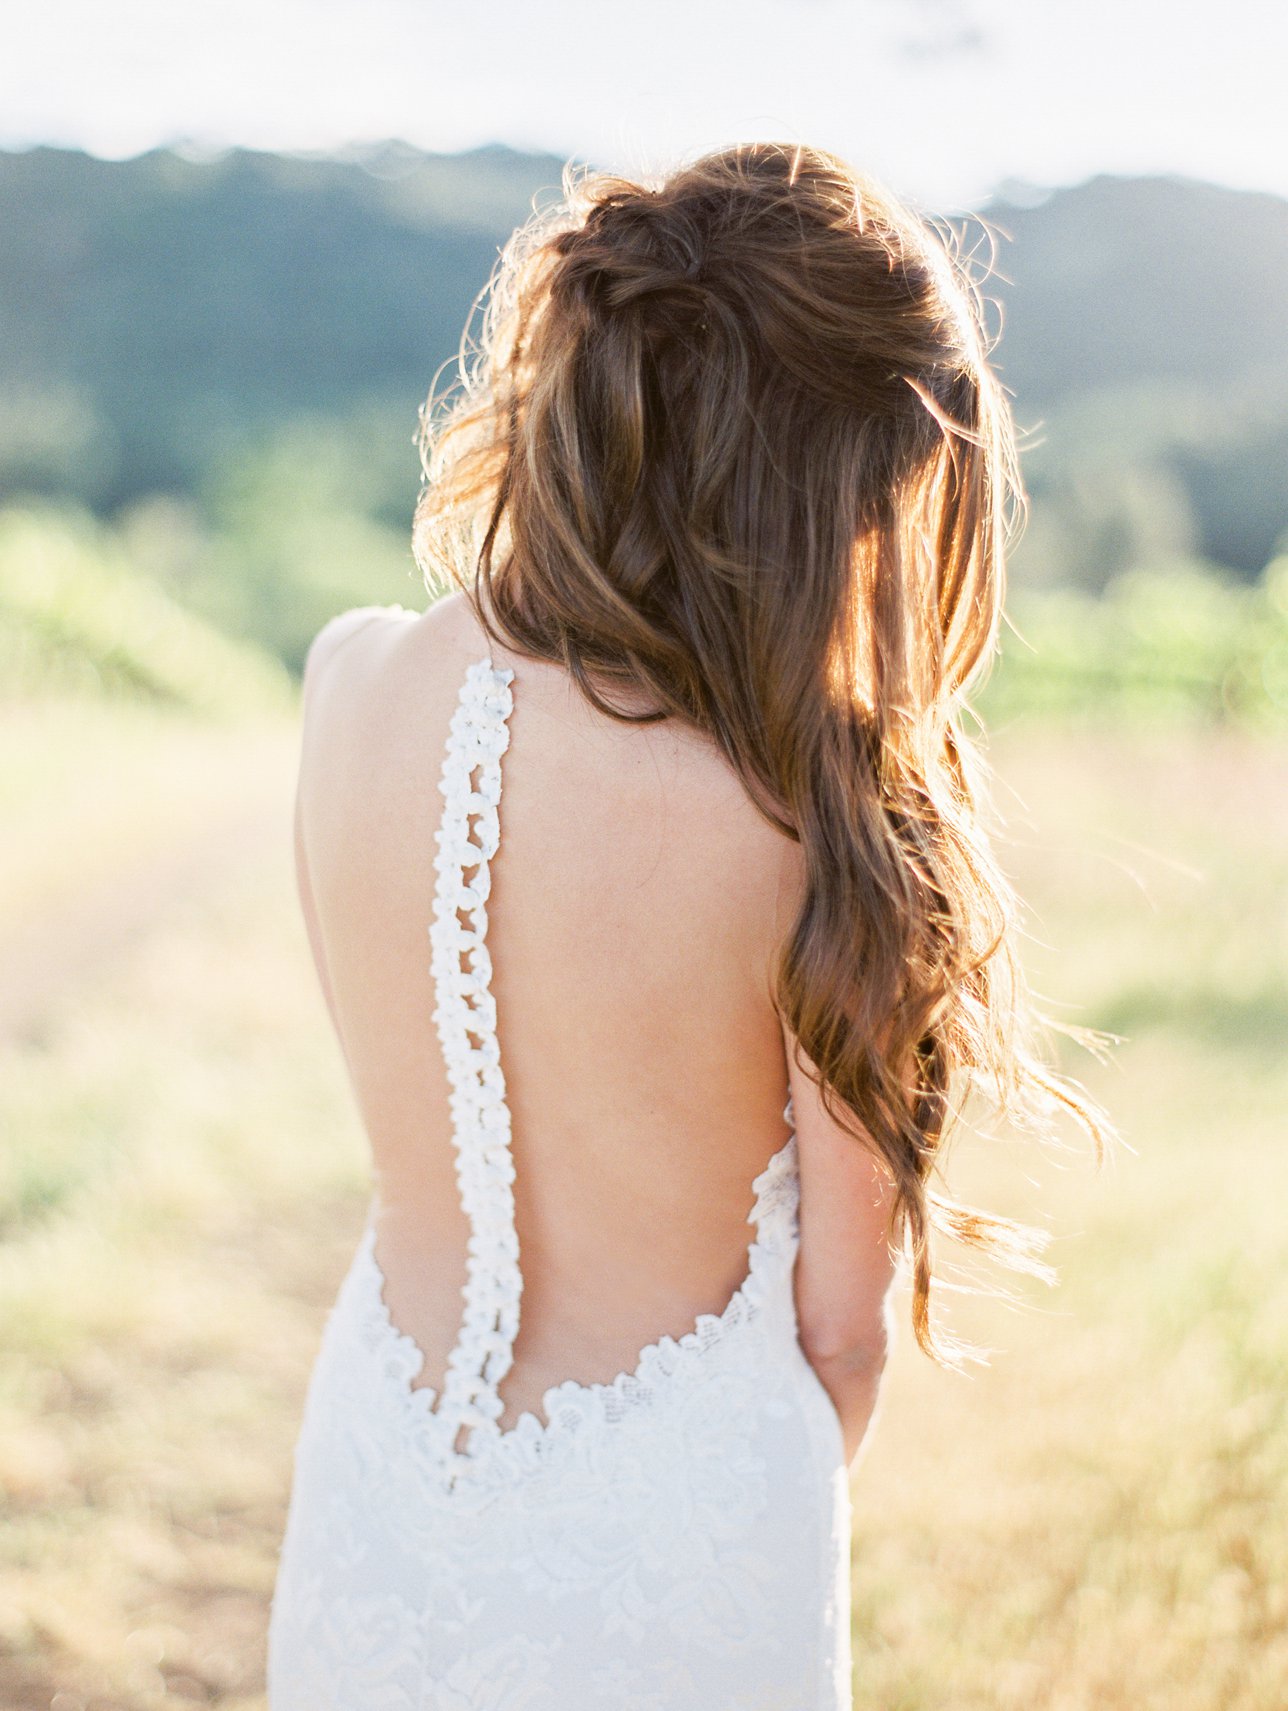 HammerSky Vineyards wedding photos - Paso Robles Wedding Photographer | Rachel Solomon Photography_9065